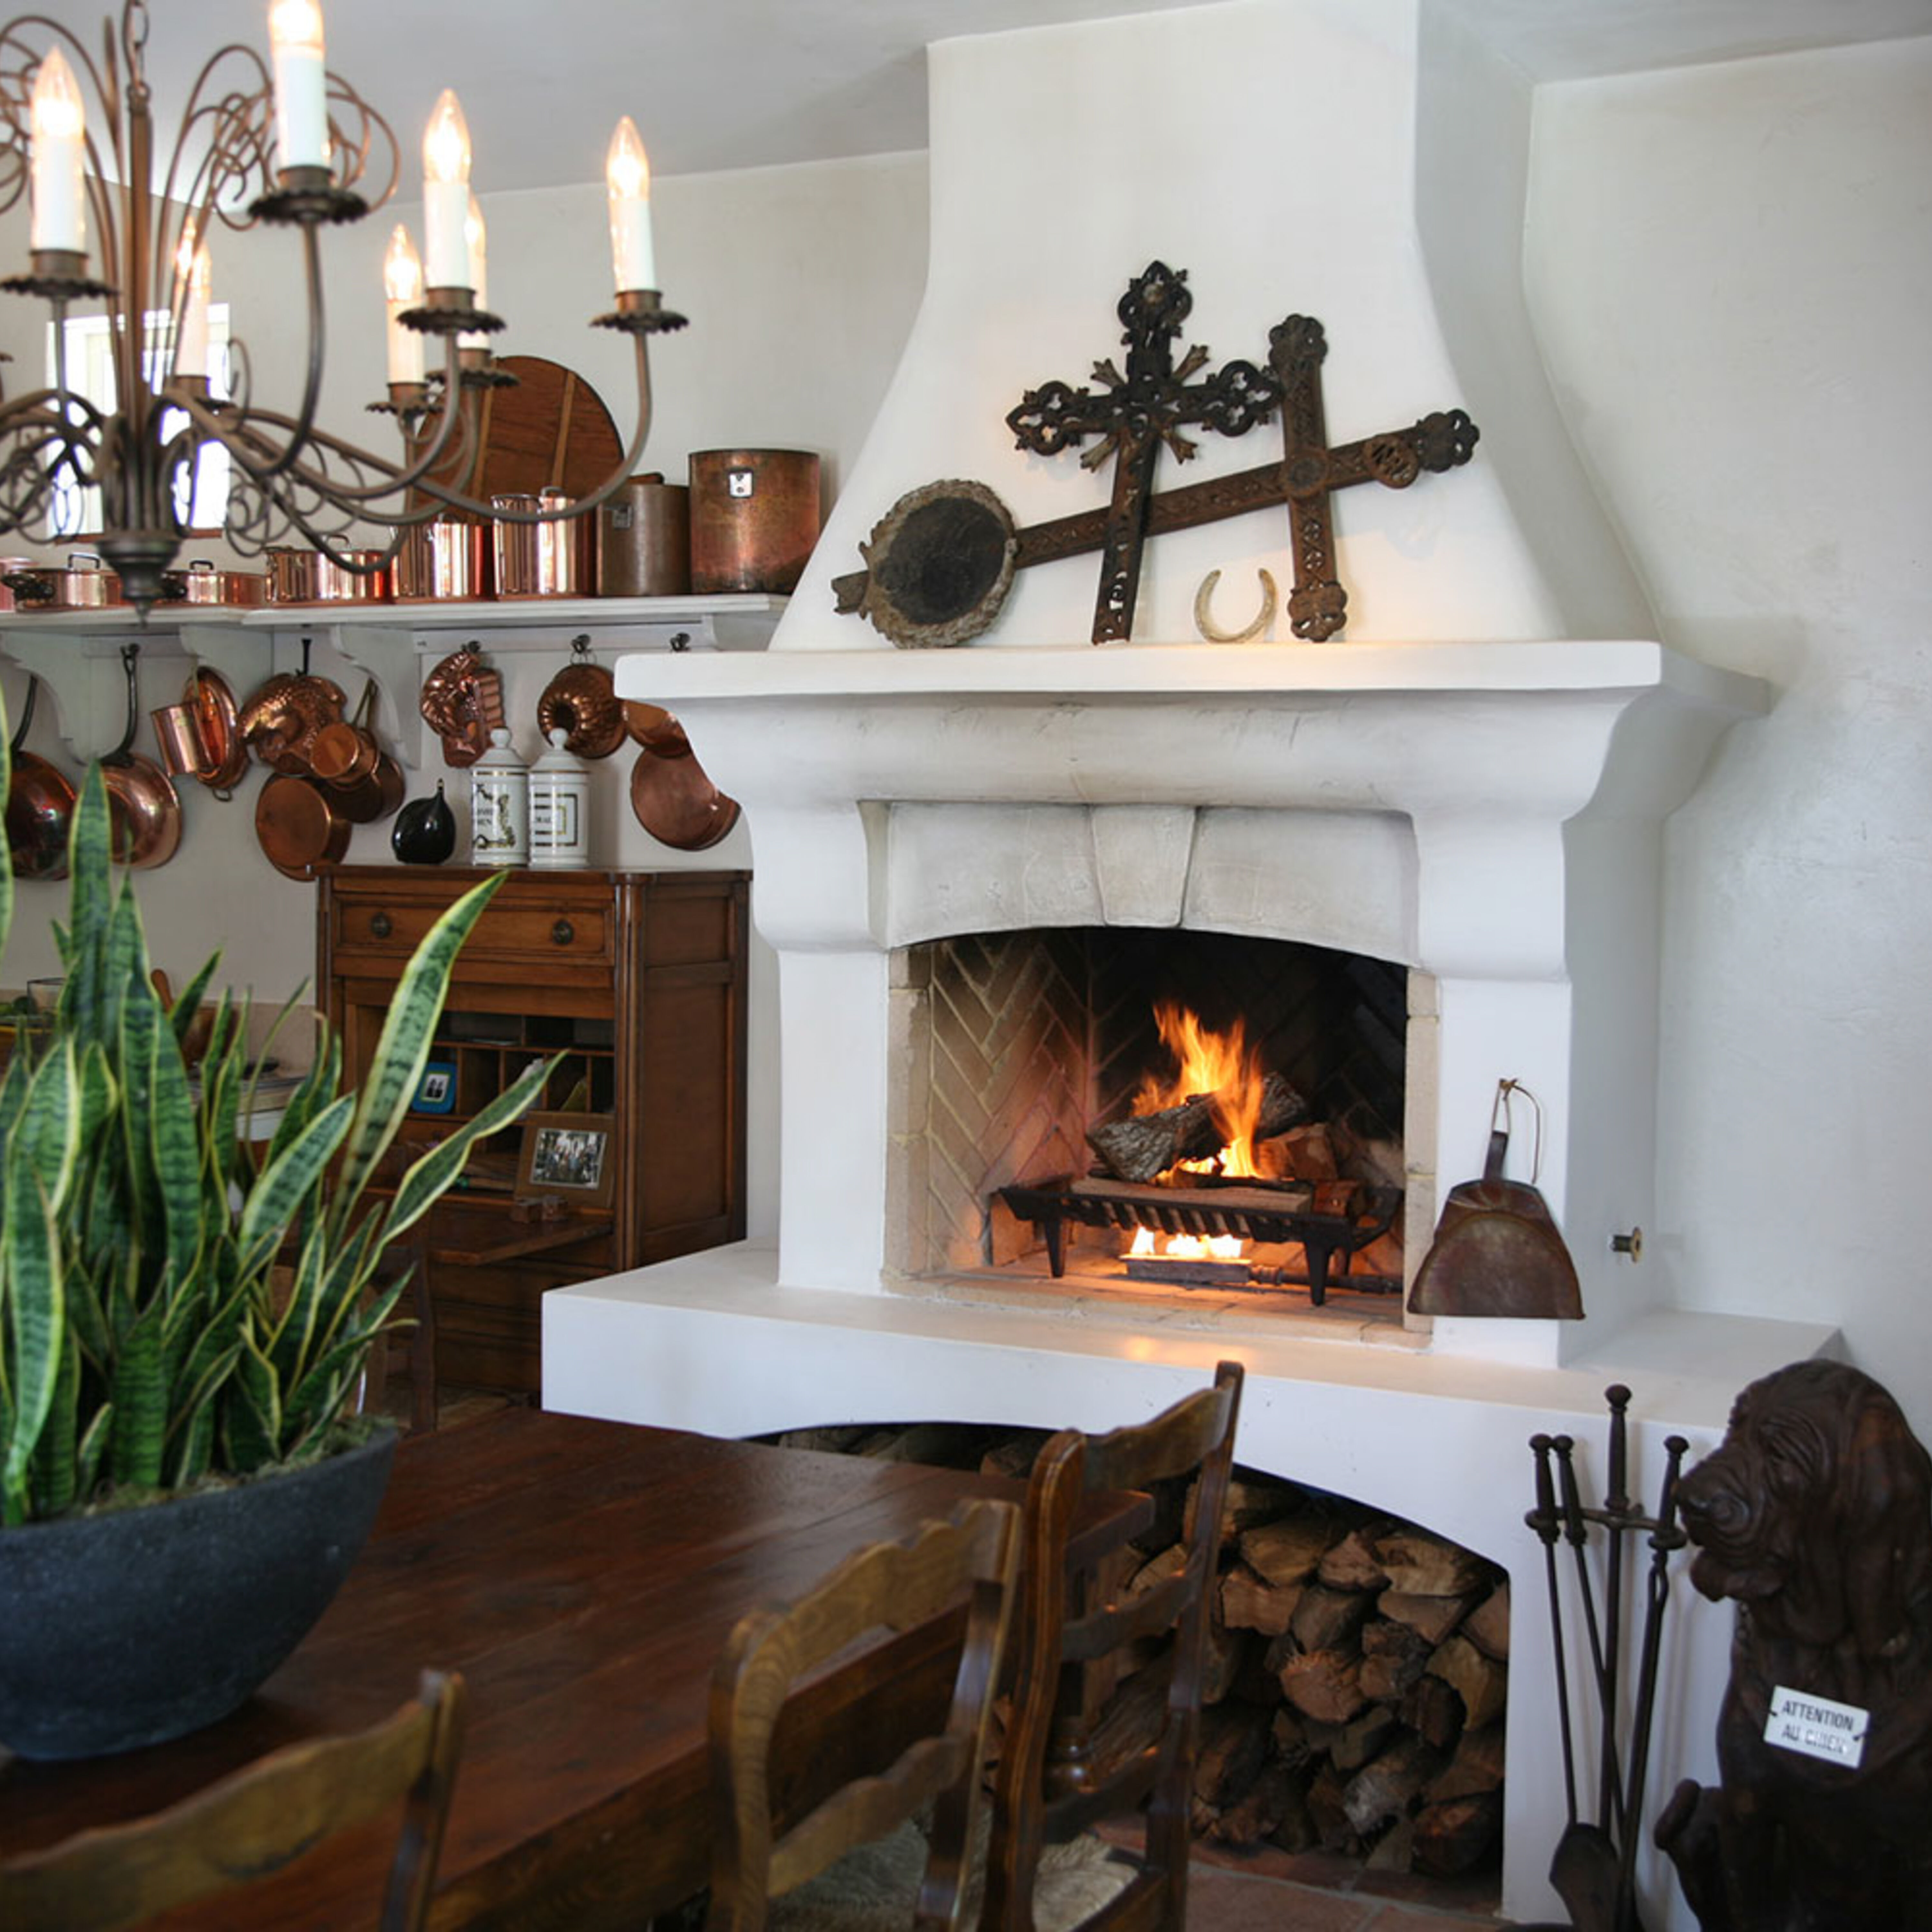 this is a photo of a traditional masonry fireplace hearth with a chimney, a log set, and chimney components